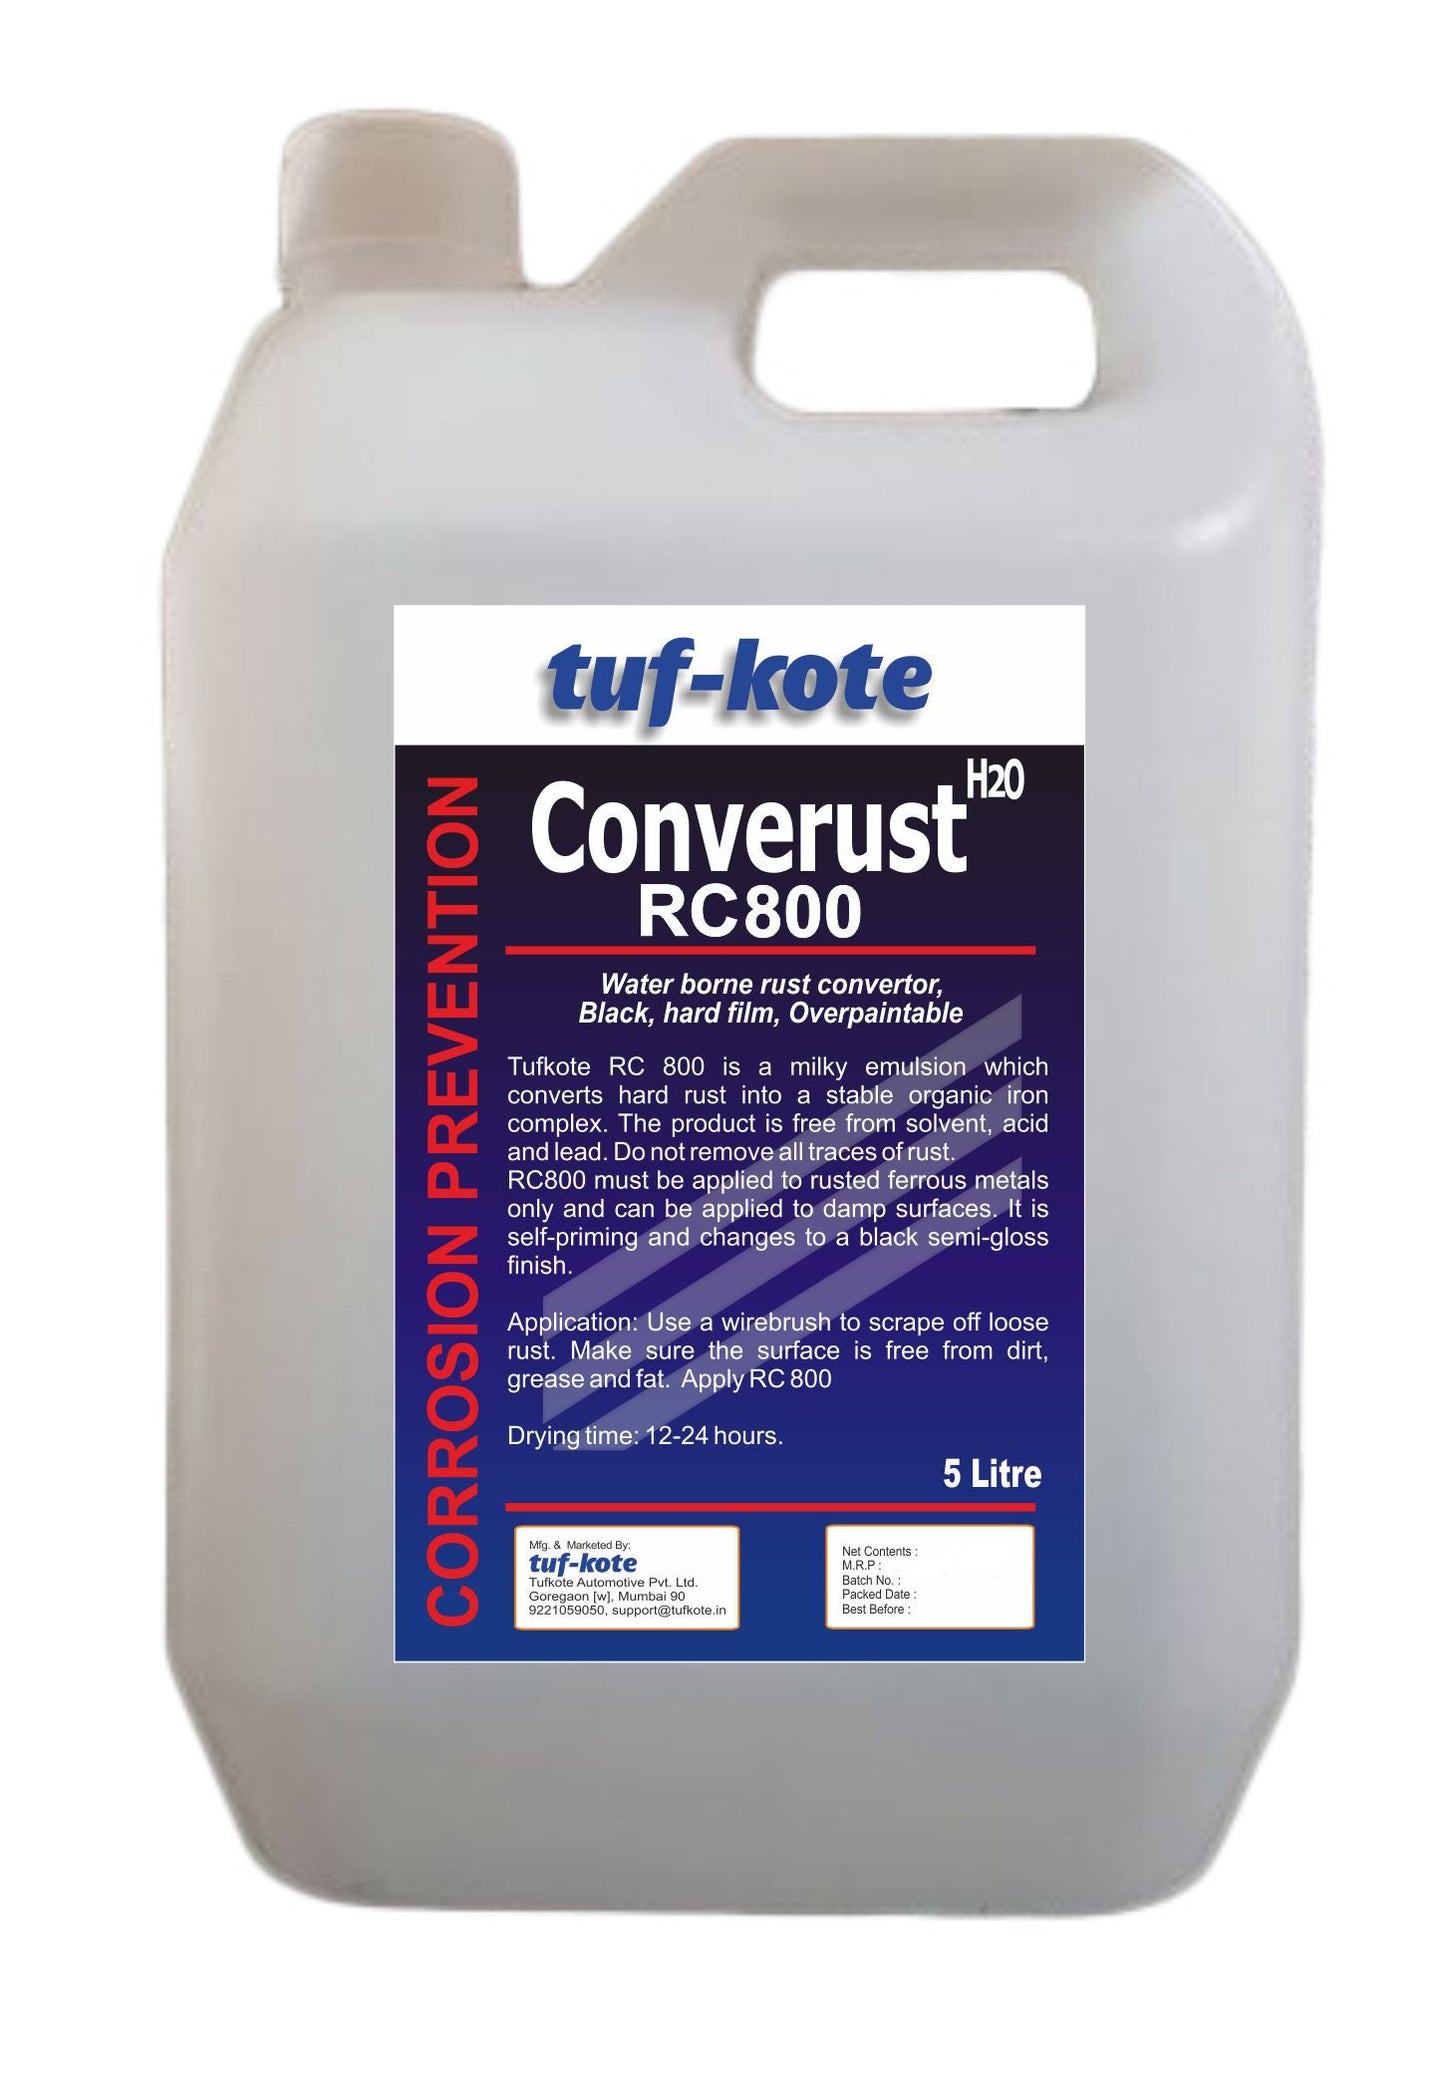 tuf-kote® CONVERUST RC800 Eco-Friendly Rust Converter and Primer All-in-One, Ultimate One-Step Solution to Convert Rusted Metal Surfaces and Prevent Further Rusting